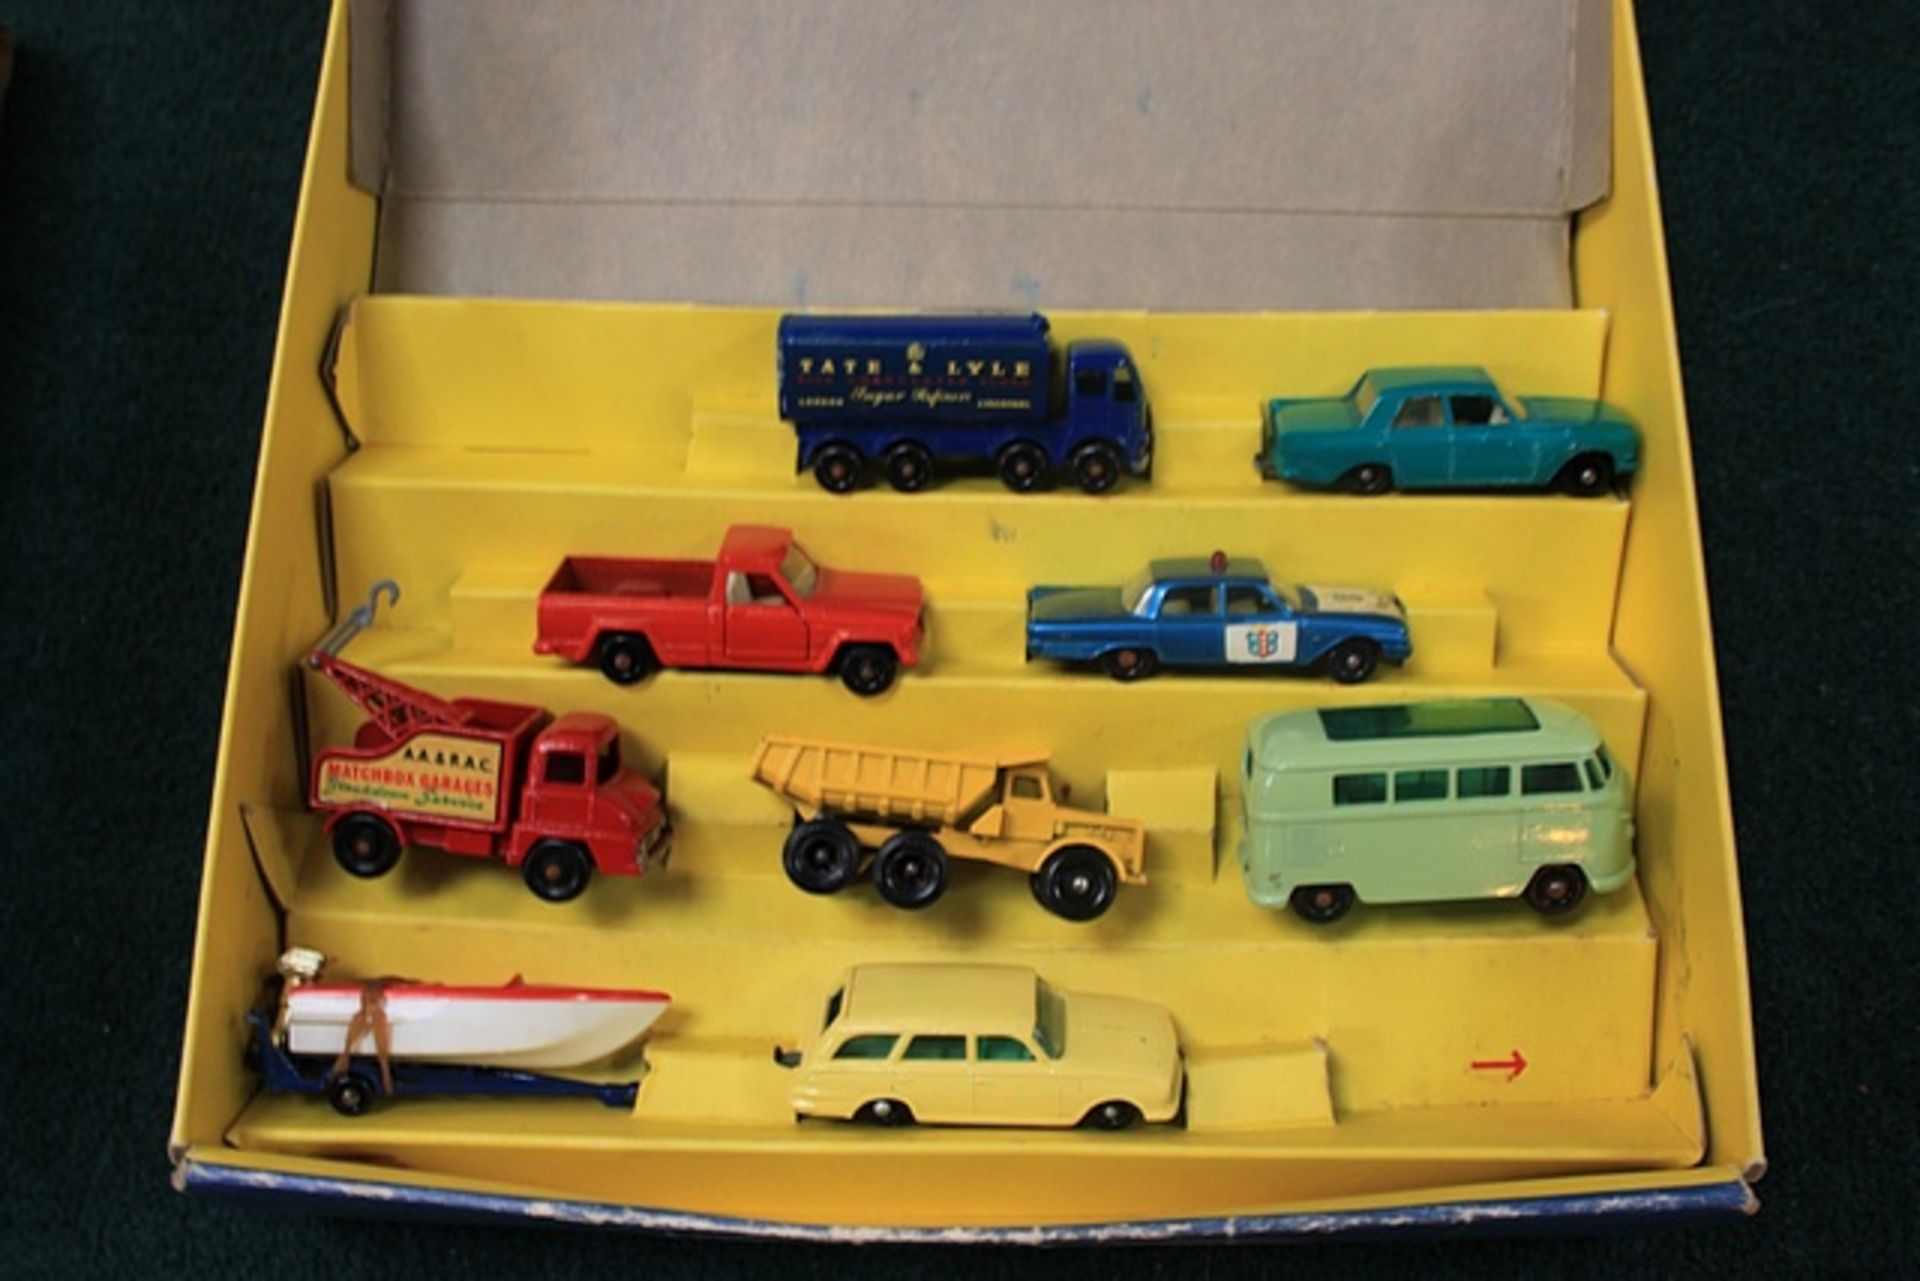 Matchbox Lesney Gift Set Motorway Set Number G-1 Comprising Of 8 Diecast Vehicles And A Boat